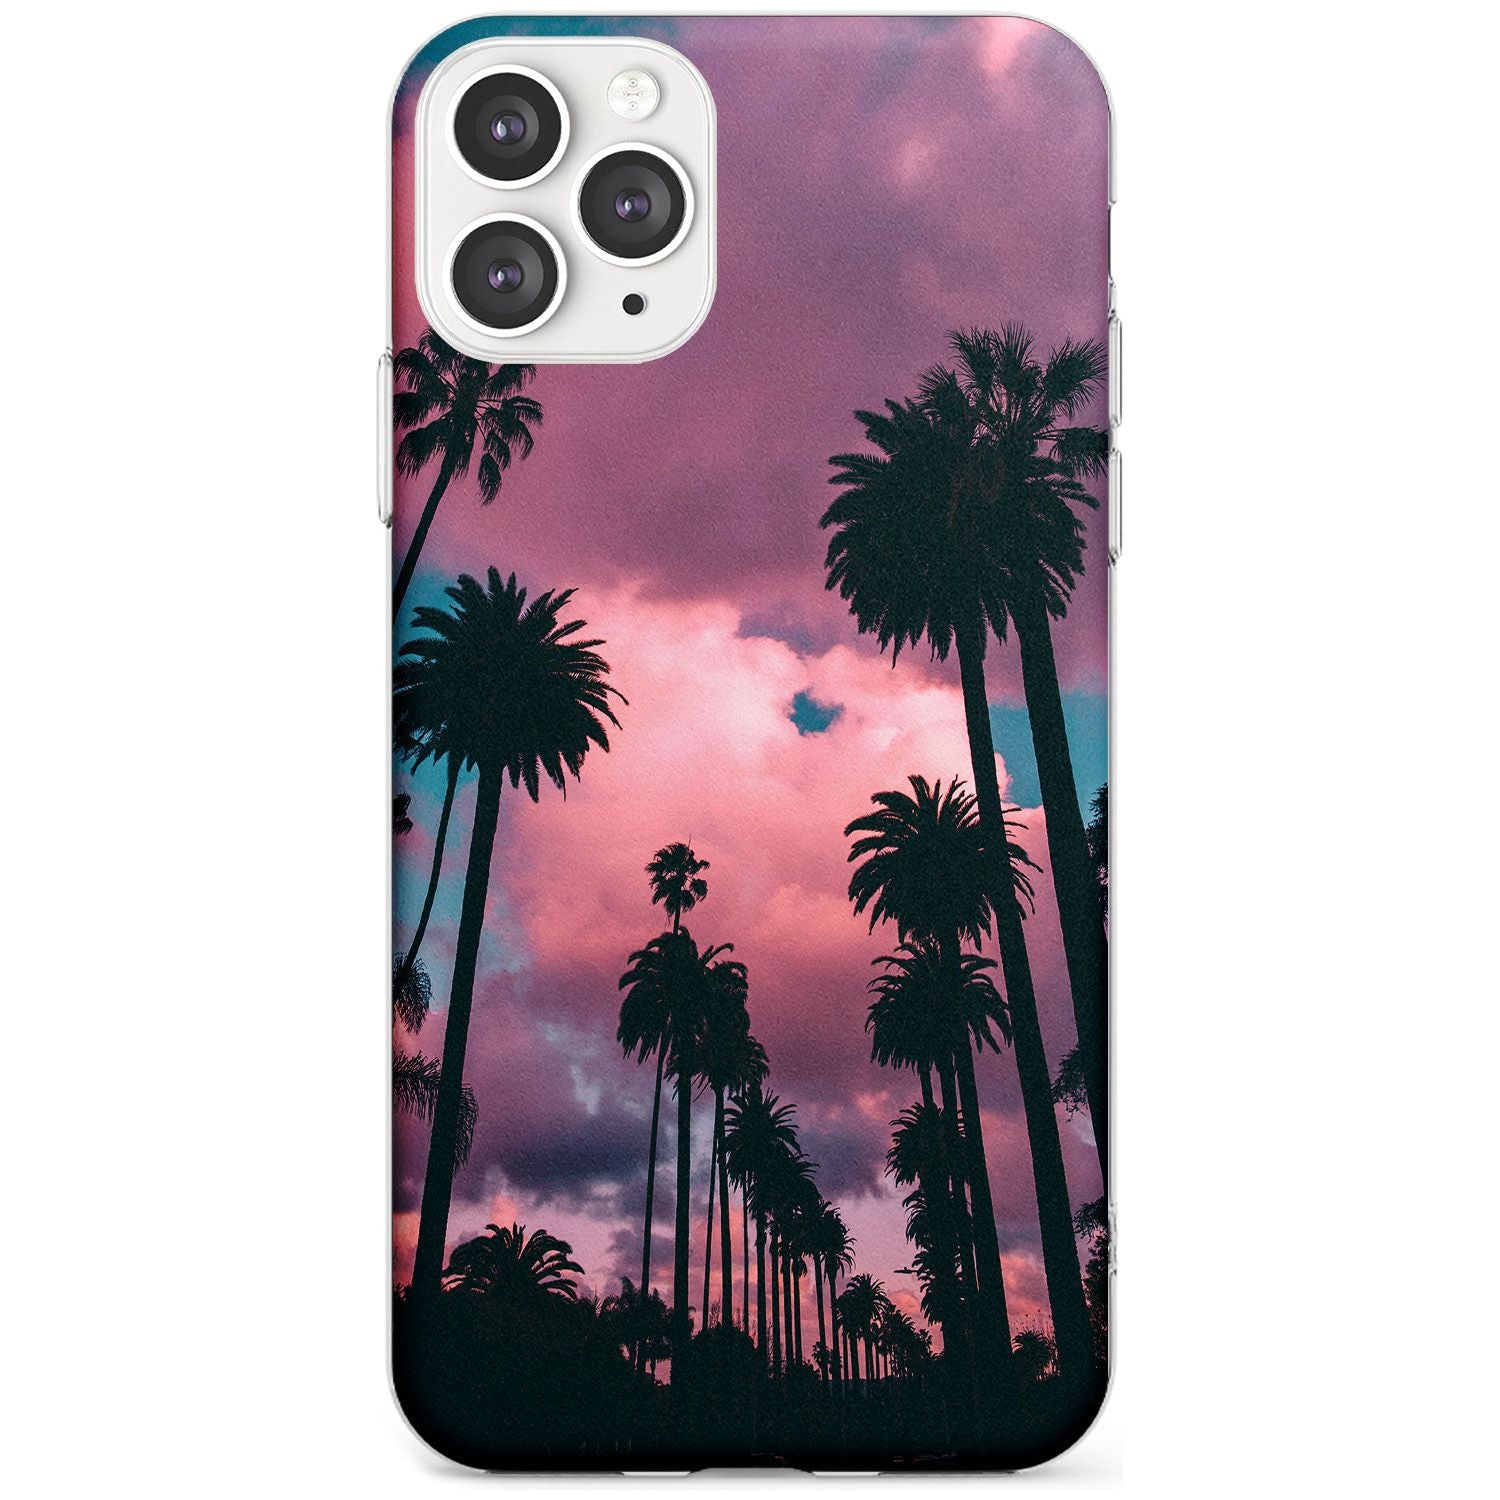 Palm Tree Sunset Photograph Slim TPU Phone Case for iPhone 11 Pro Max